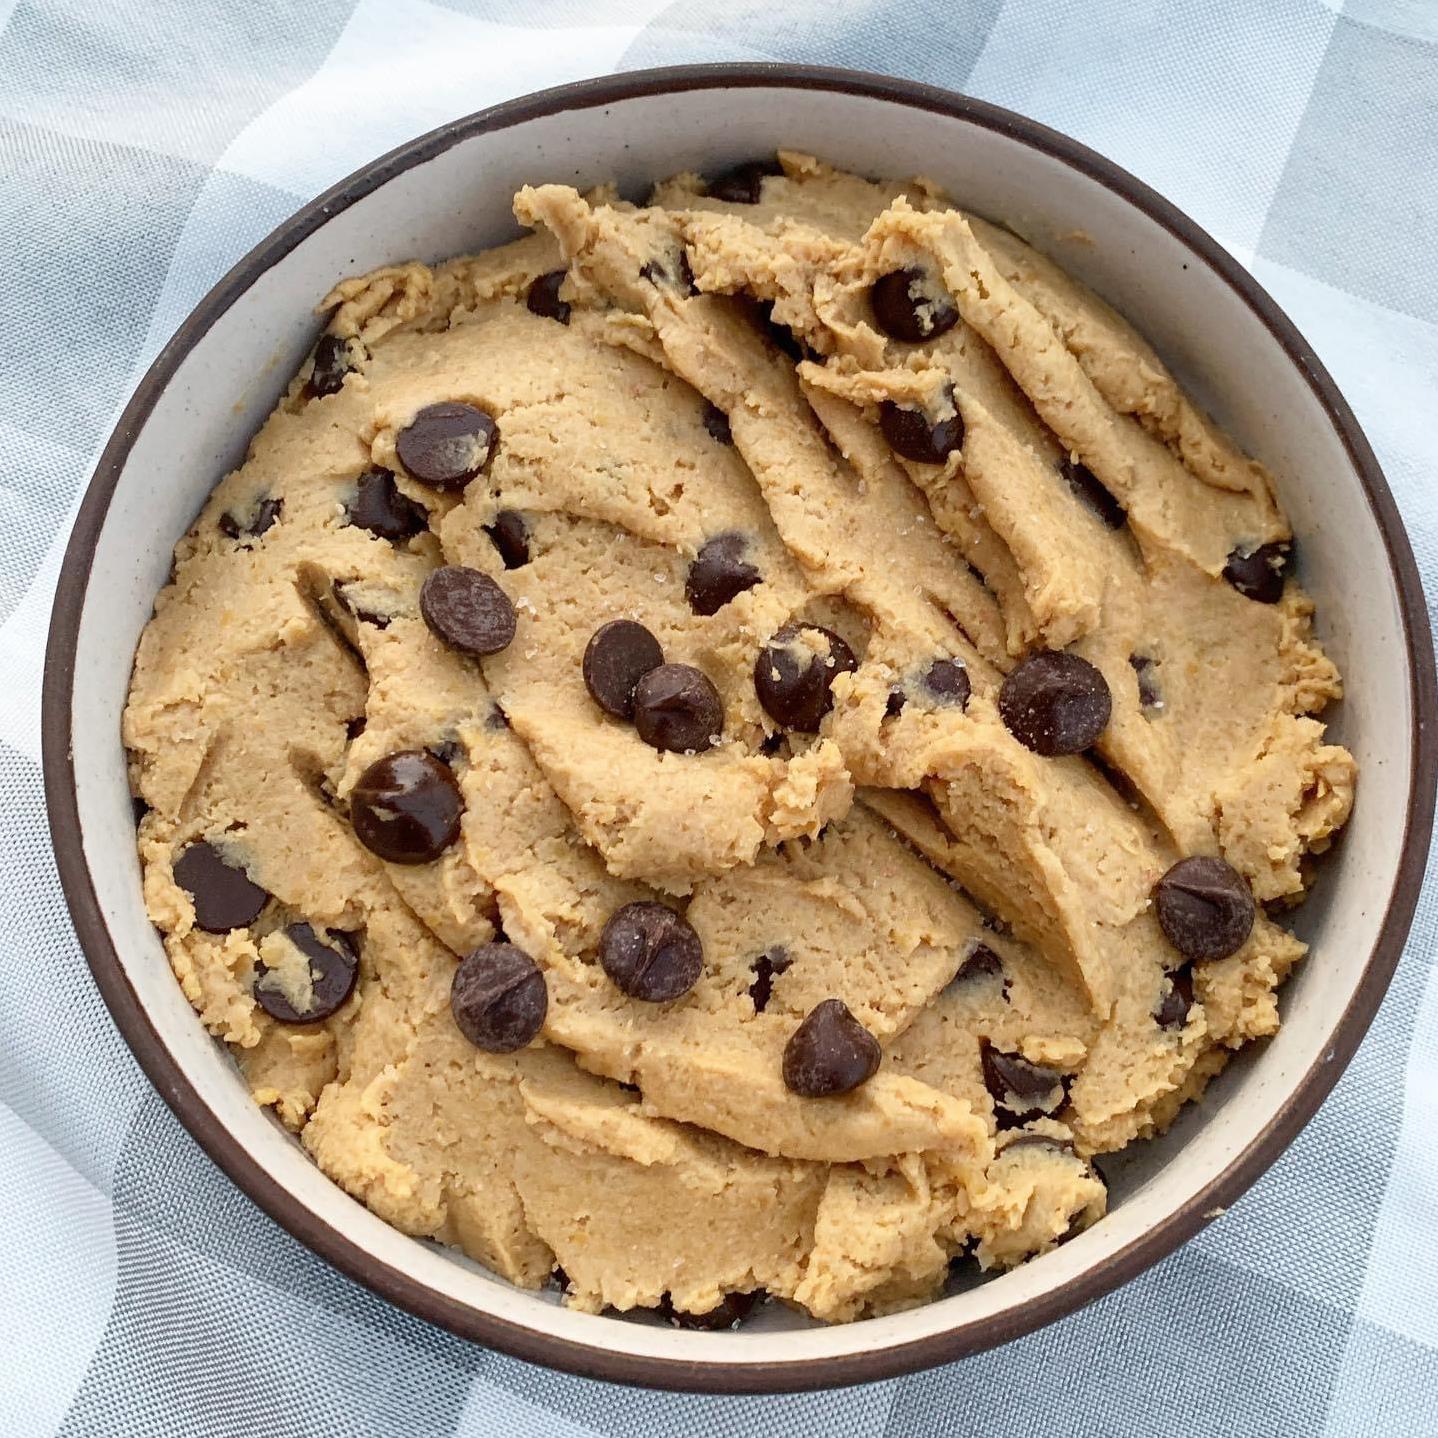  Enjoy the taste of cookie dough without the raw eggs.